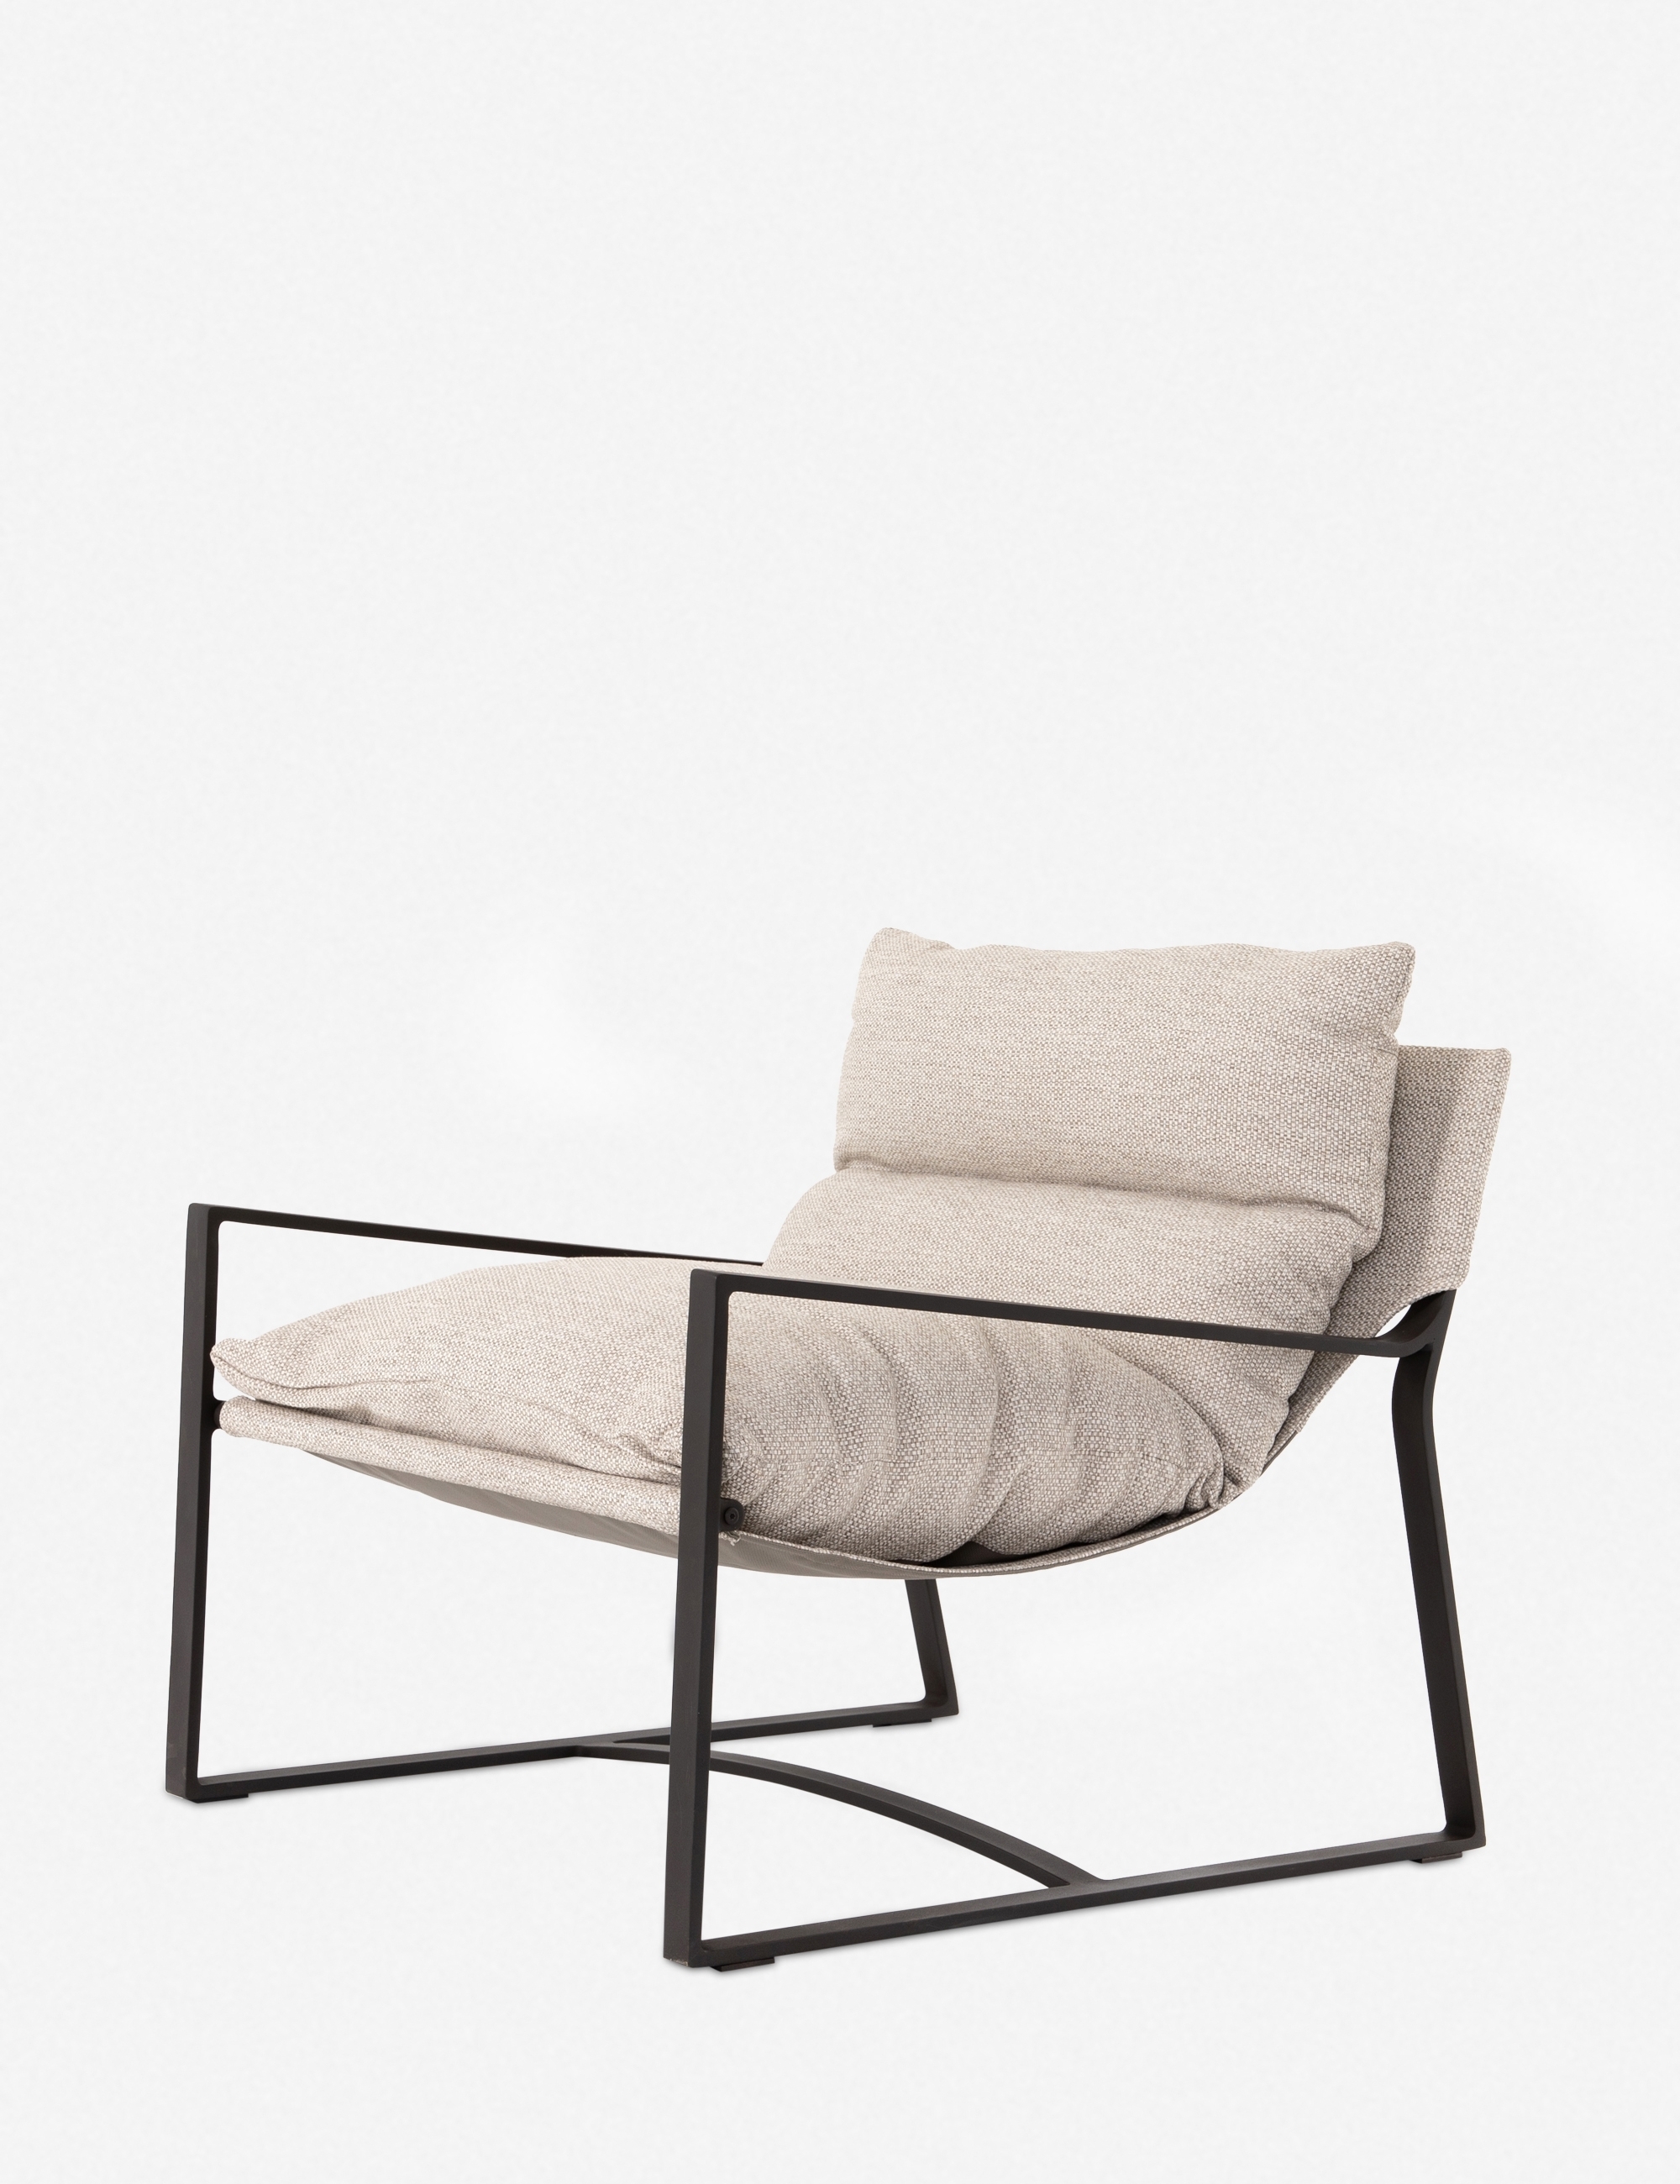 Pali Outdoor Accent Chair - Image 3